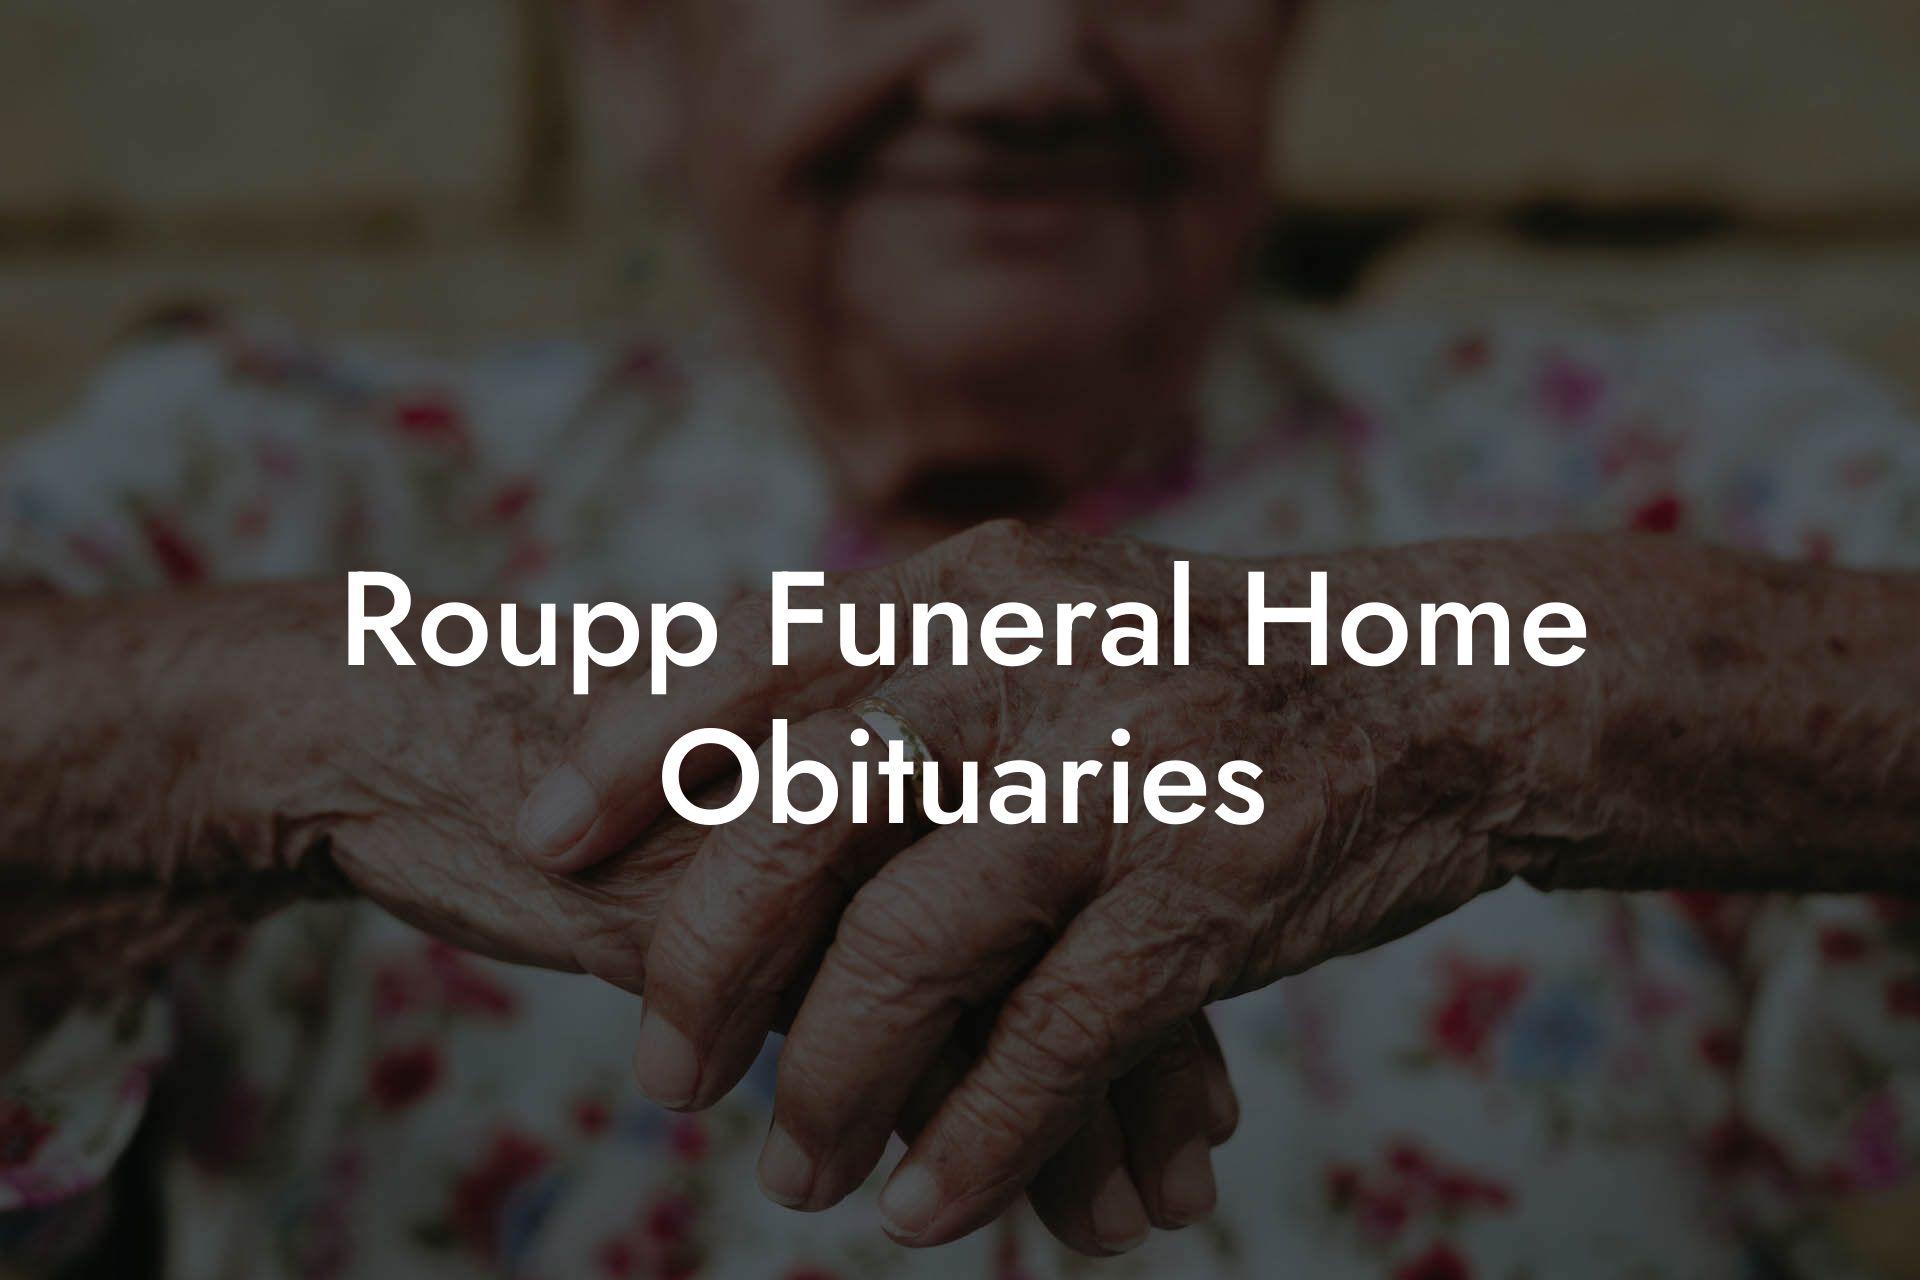 Roupp Funeral Home Obituaries